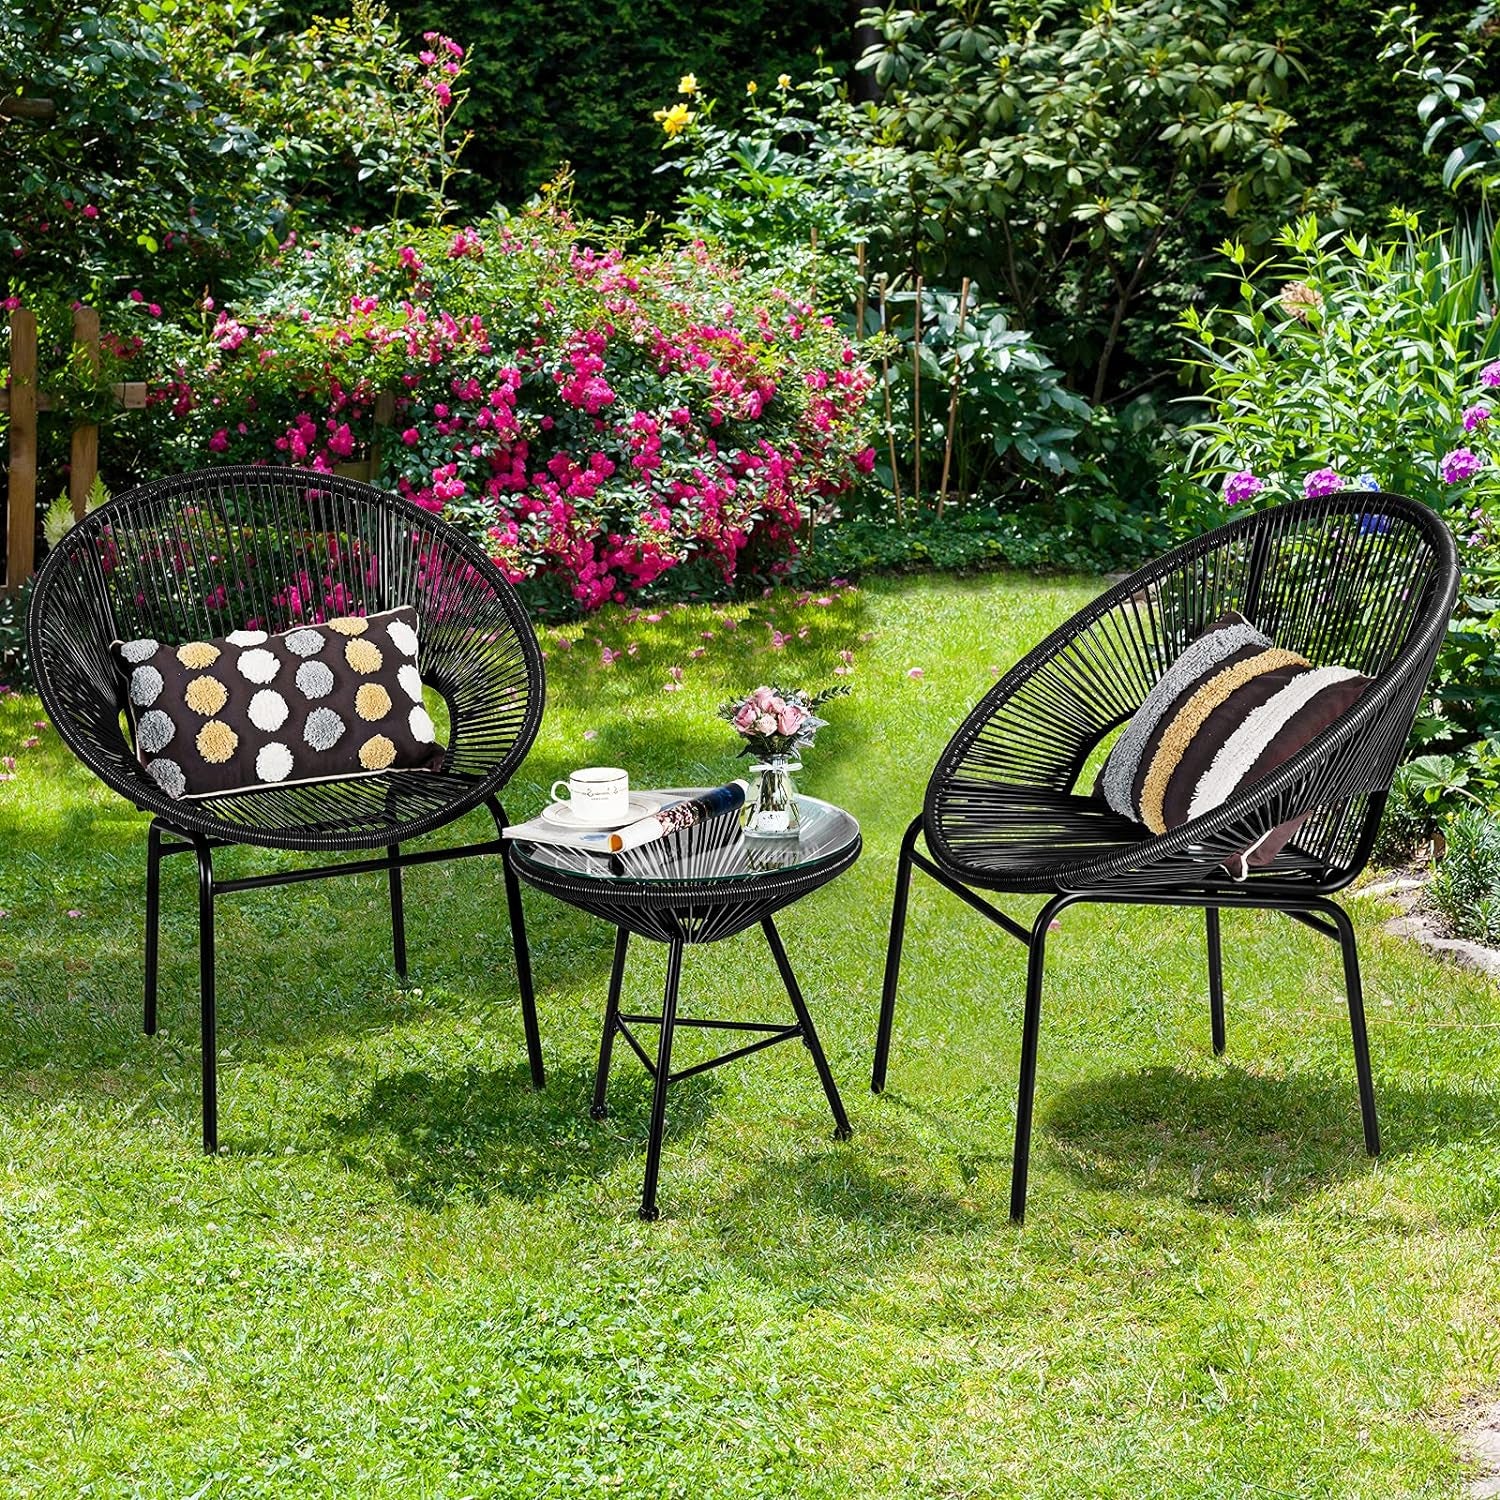 3 Piece All Weather Bistro Set for Patio